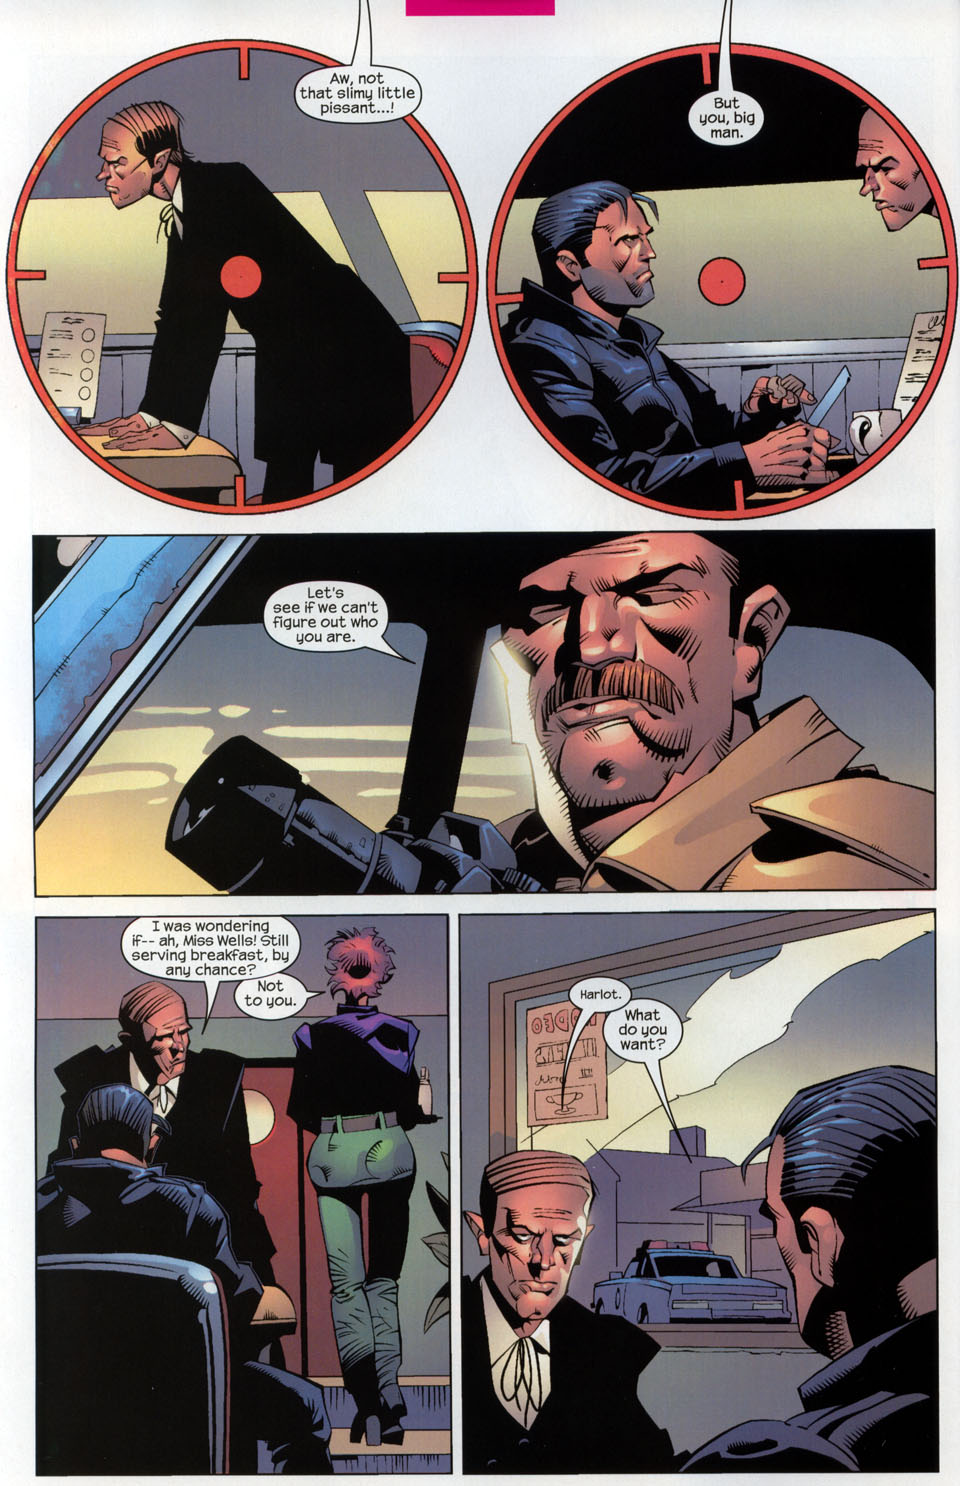 The Punisher (2001) issue 29 - Streets of Laredo #02 - Page 3